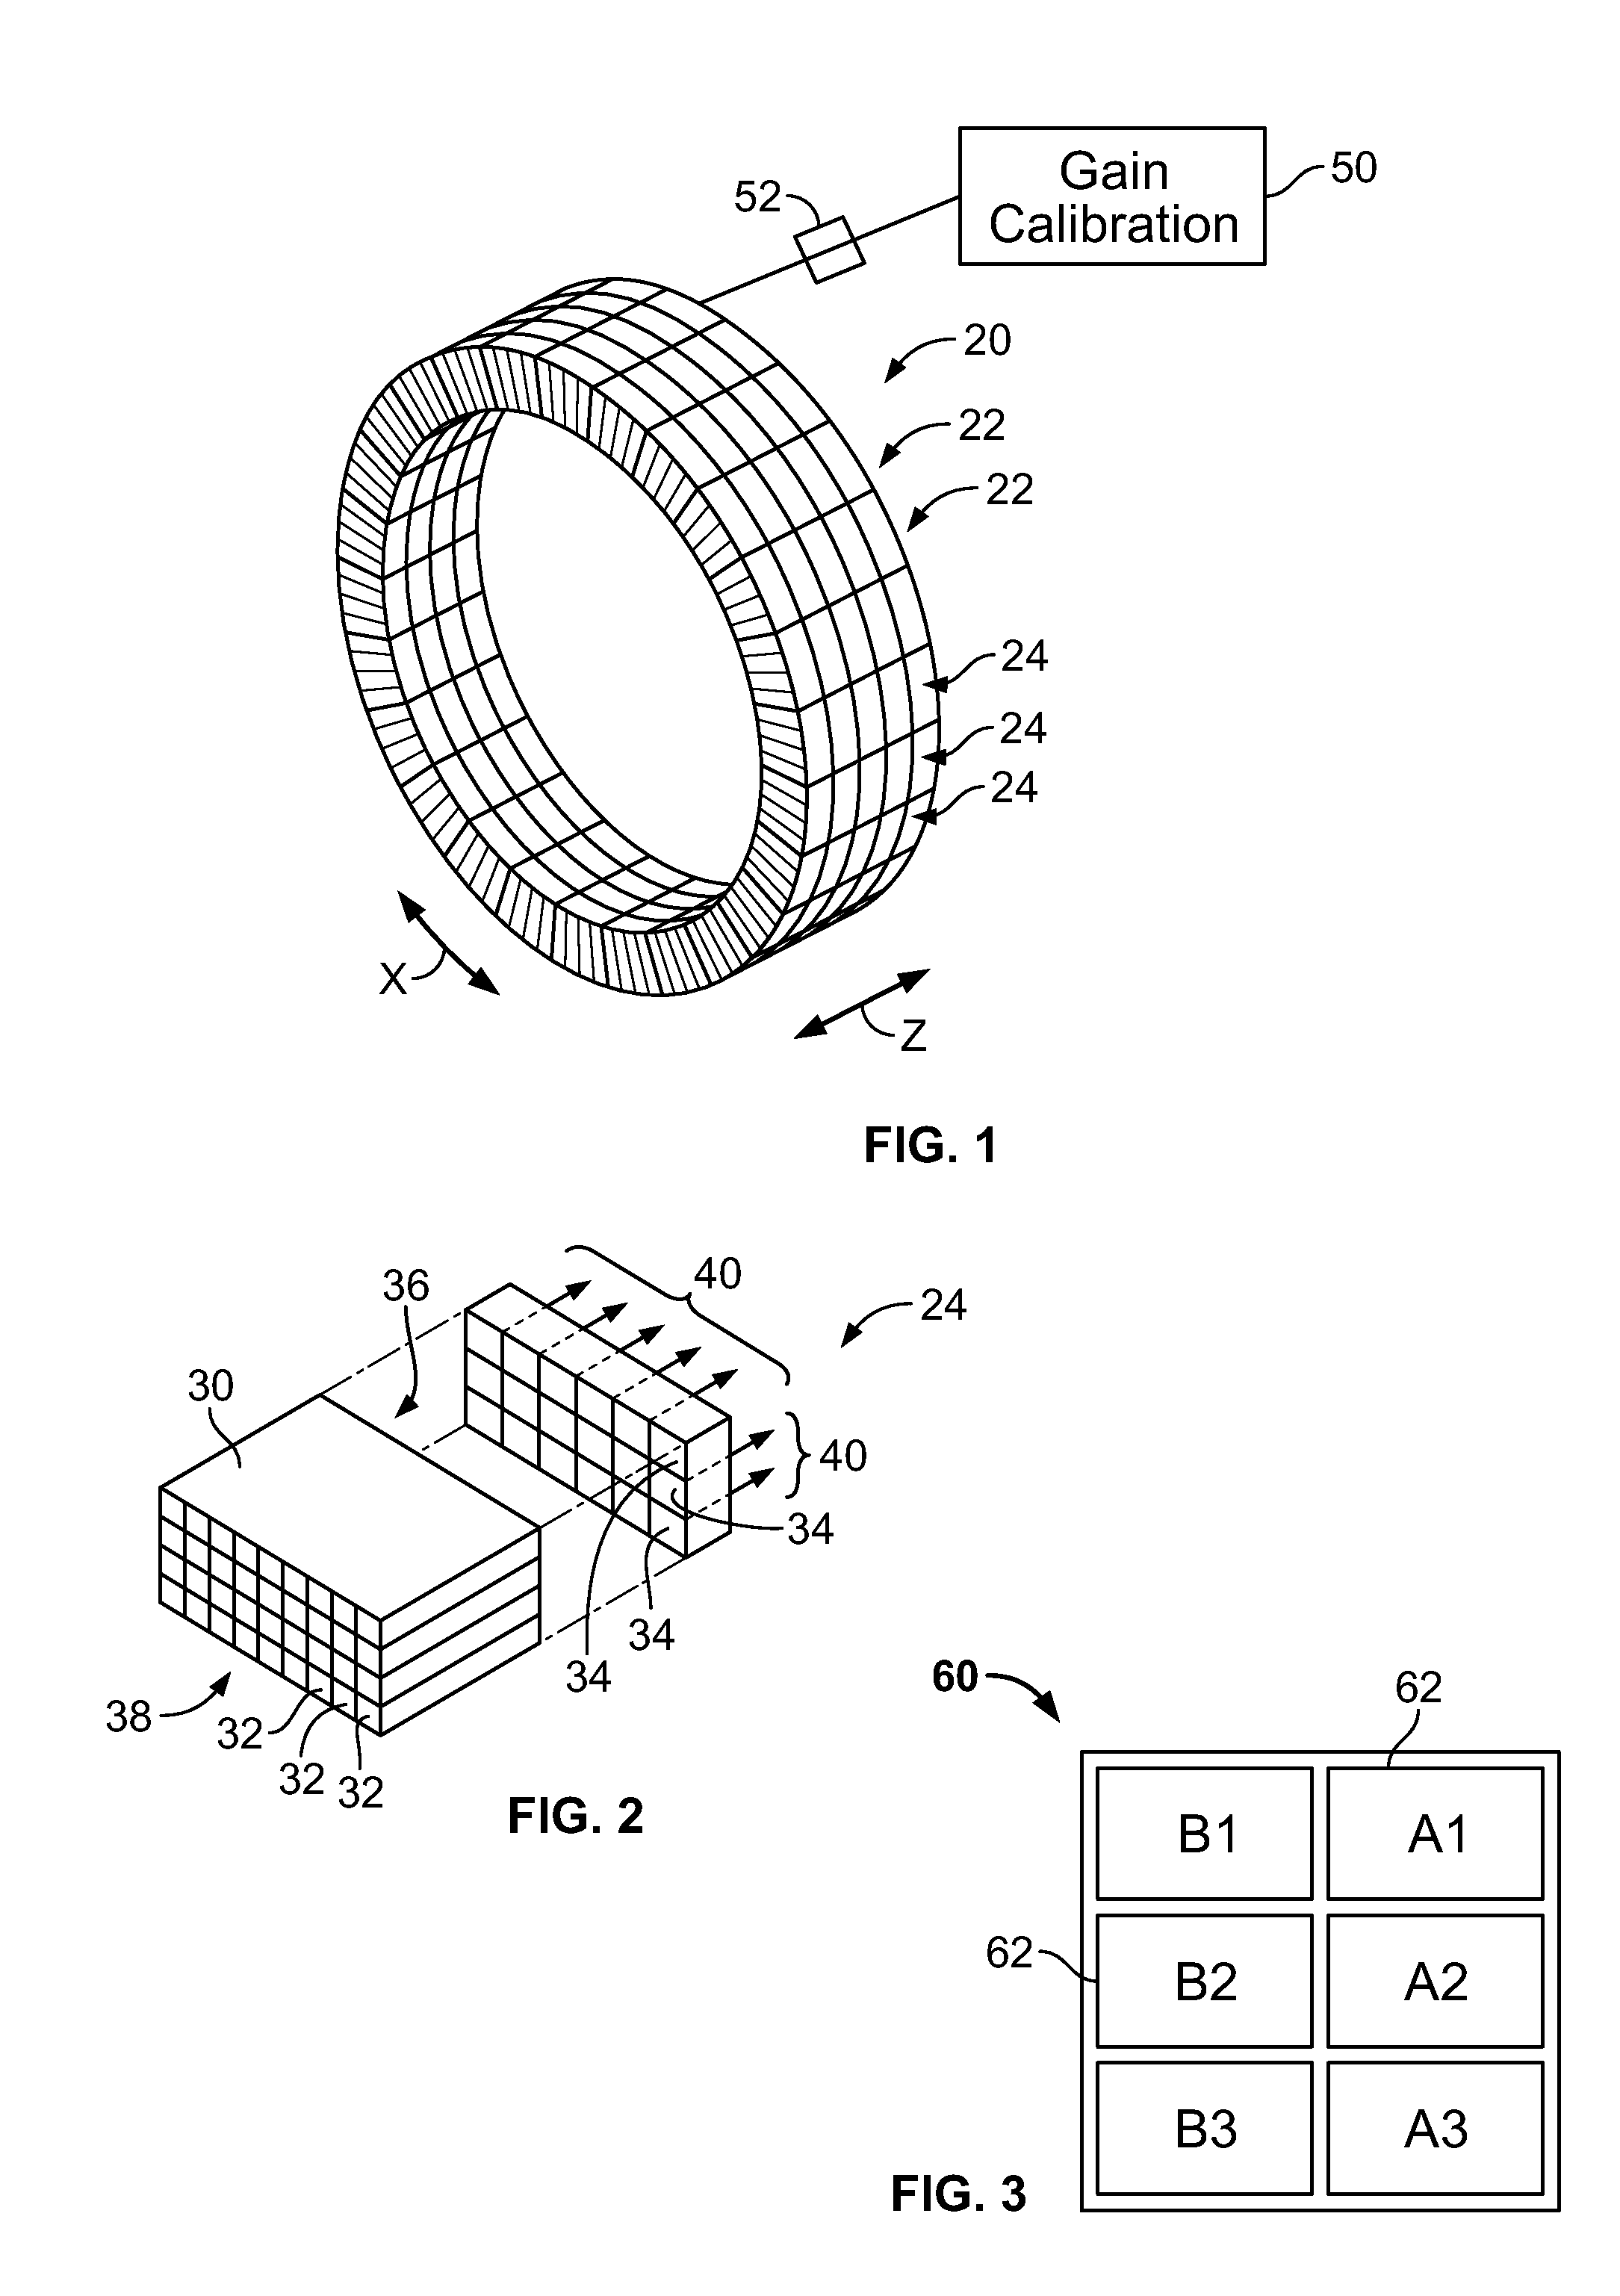 Methods and systems for gain calibration of gamma ray detectors